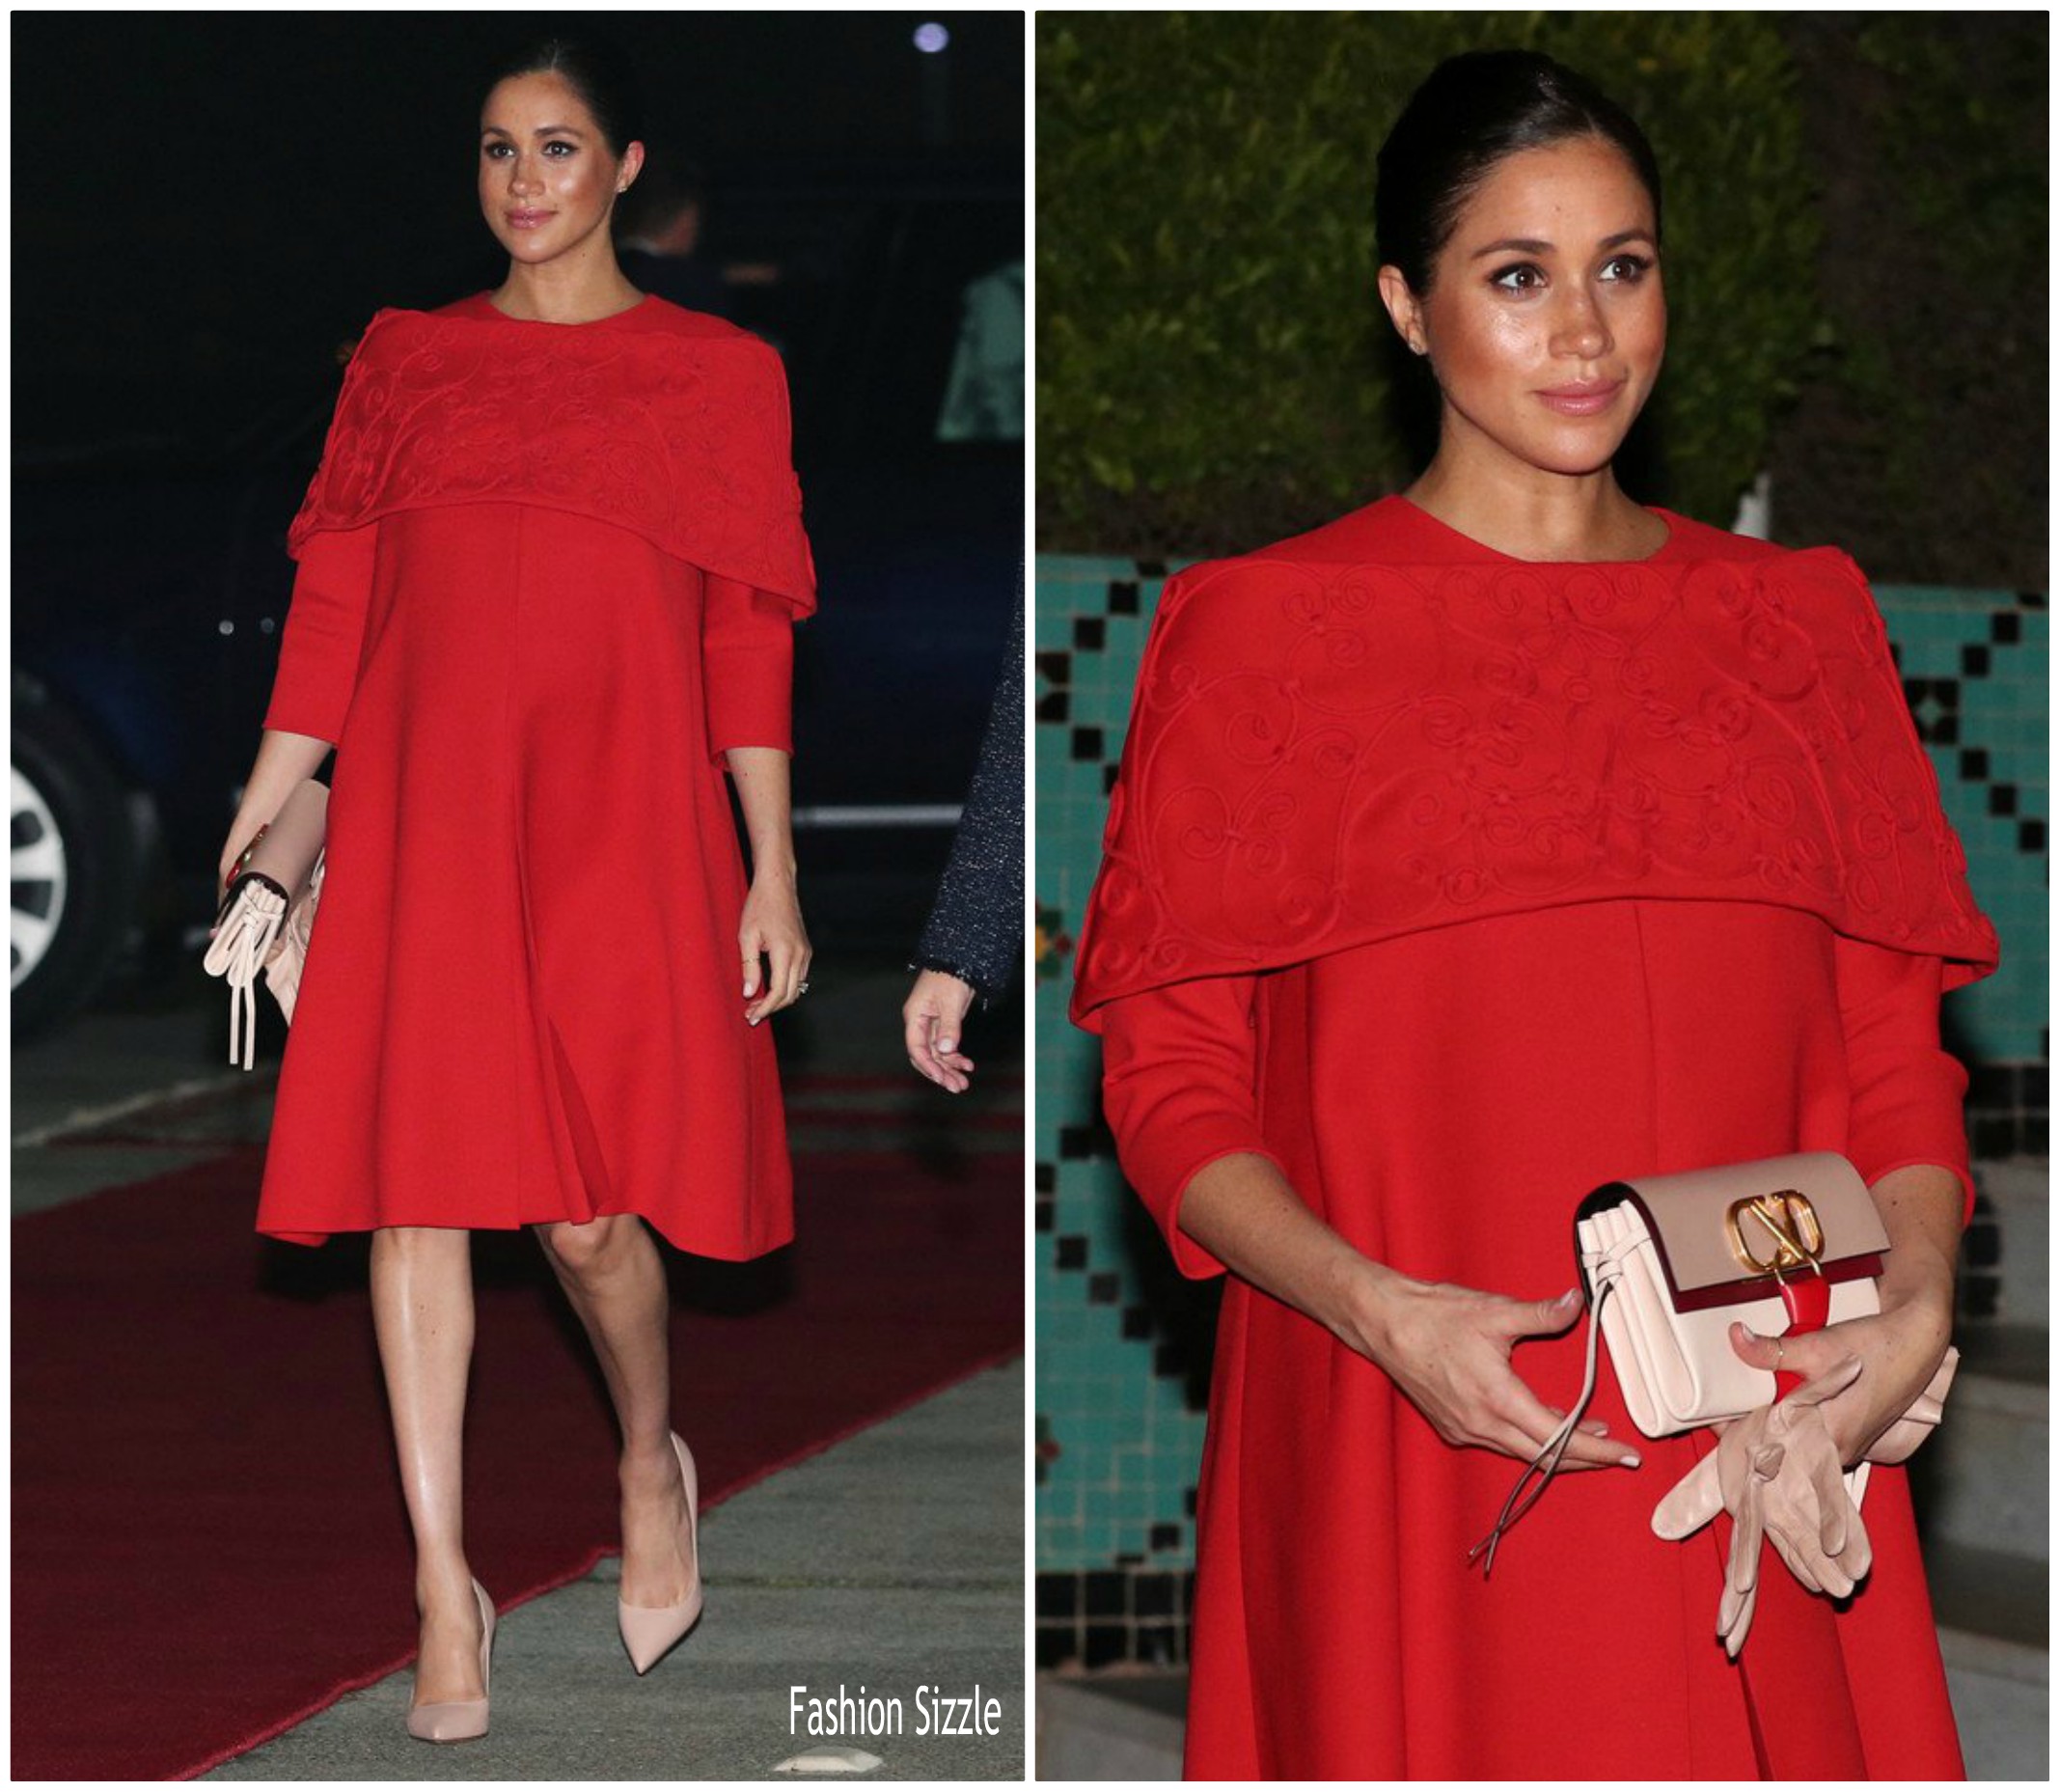 Meghan, Duchess of Sussex In Valentino @ Morocco Visit